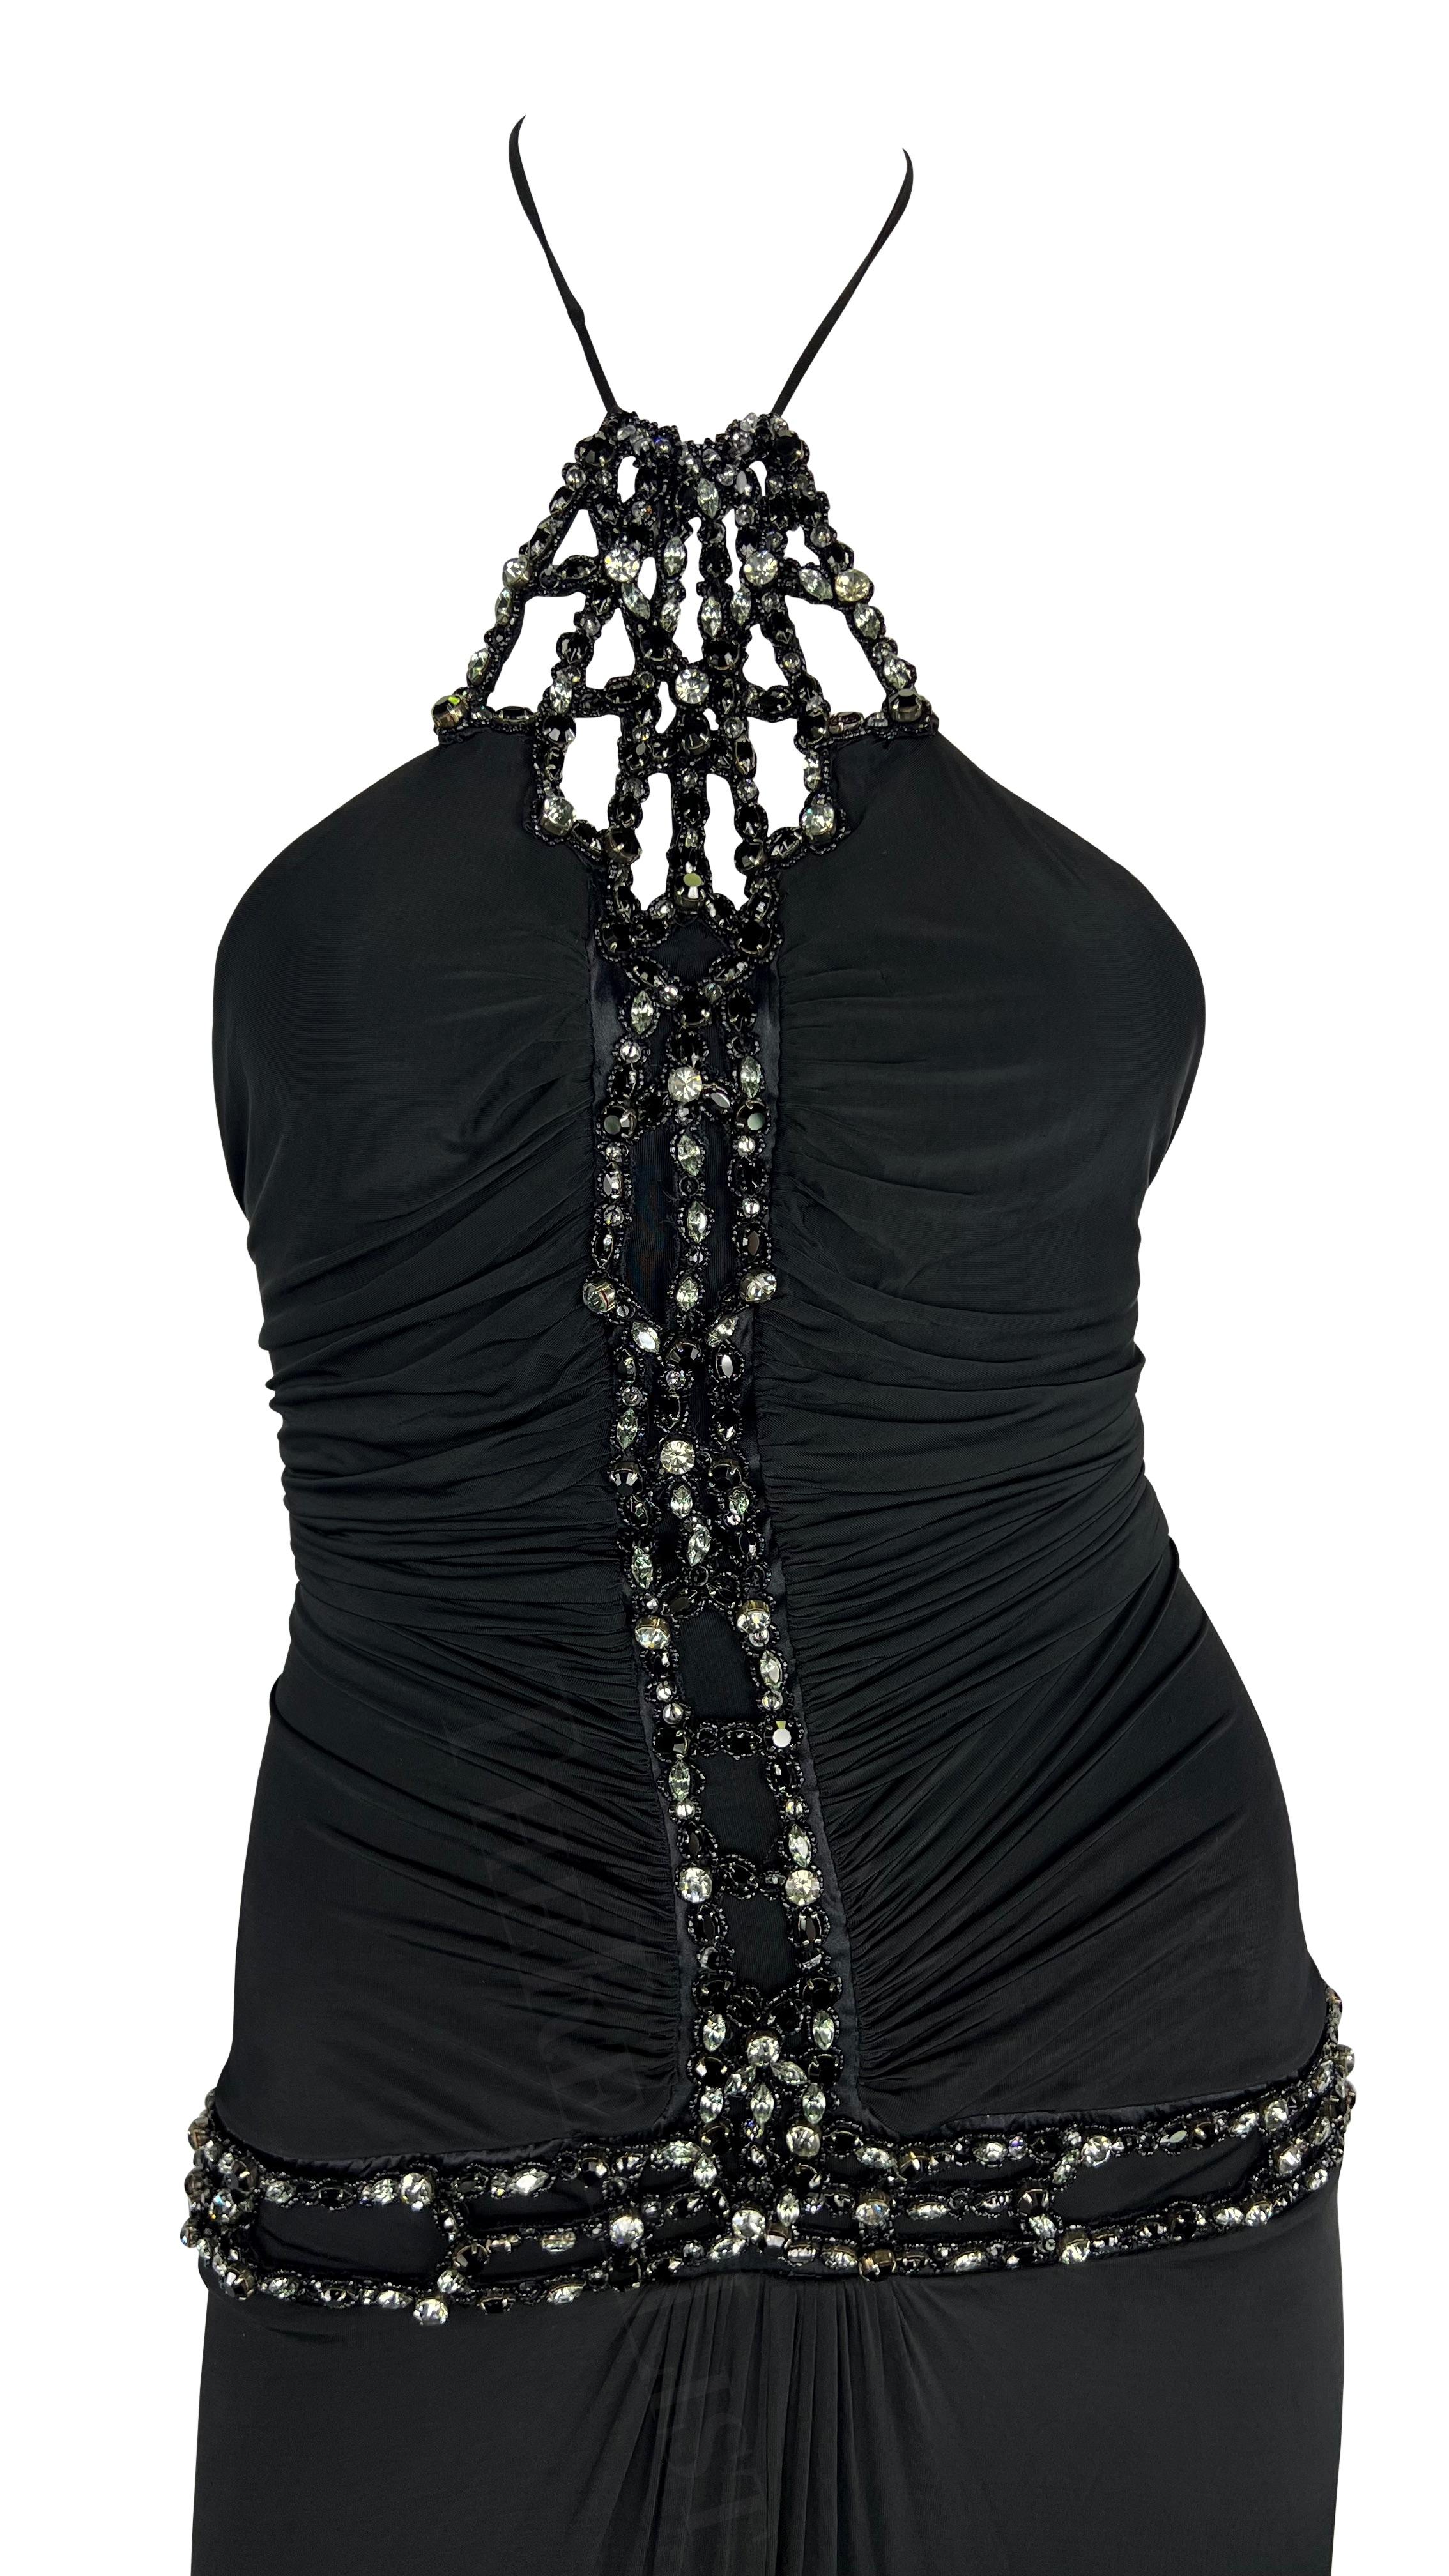 S/S 2005 Roberto Cavalli Rhinestone Ruched Bodycon Stretch Black Halter Gown In Excellent Condition For Sale In West Hollywood, CA